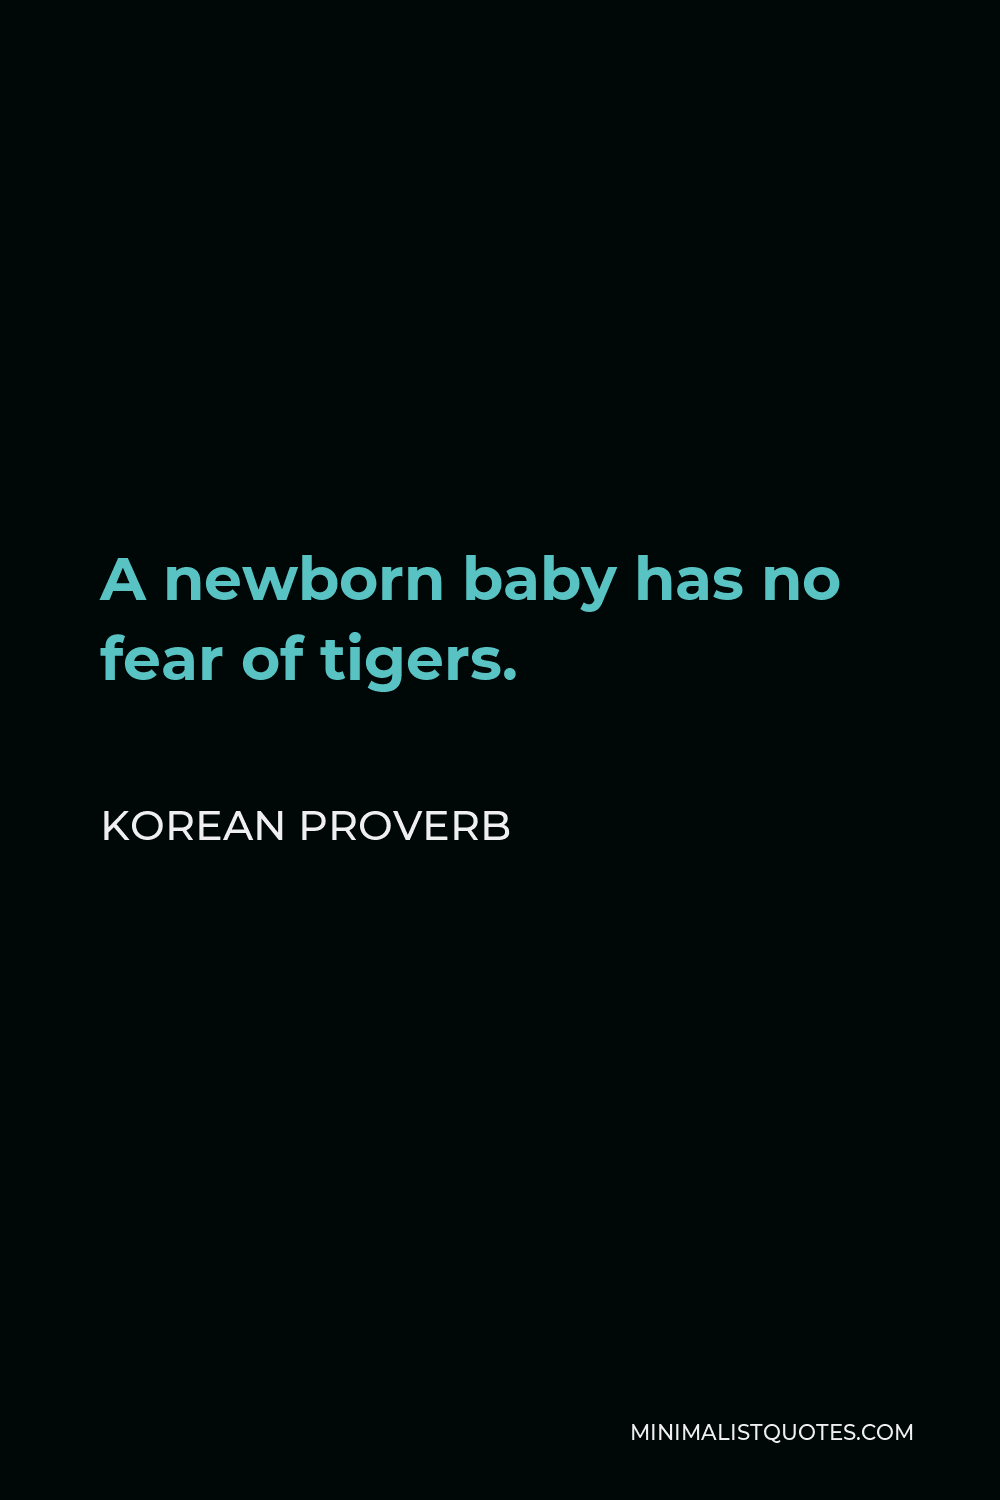 Korean Proverb Quote - A newborn baby has no fear of tigers.